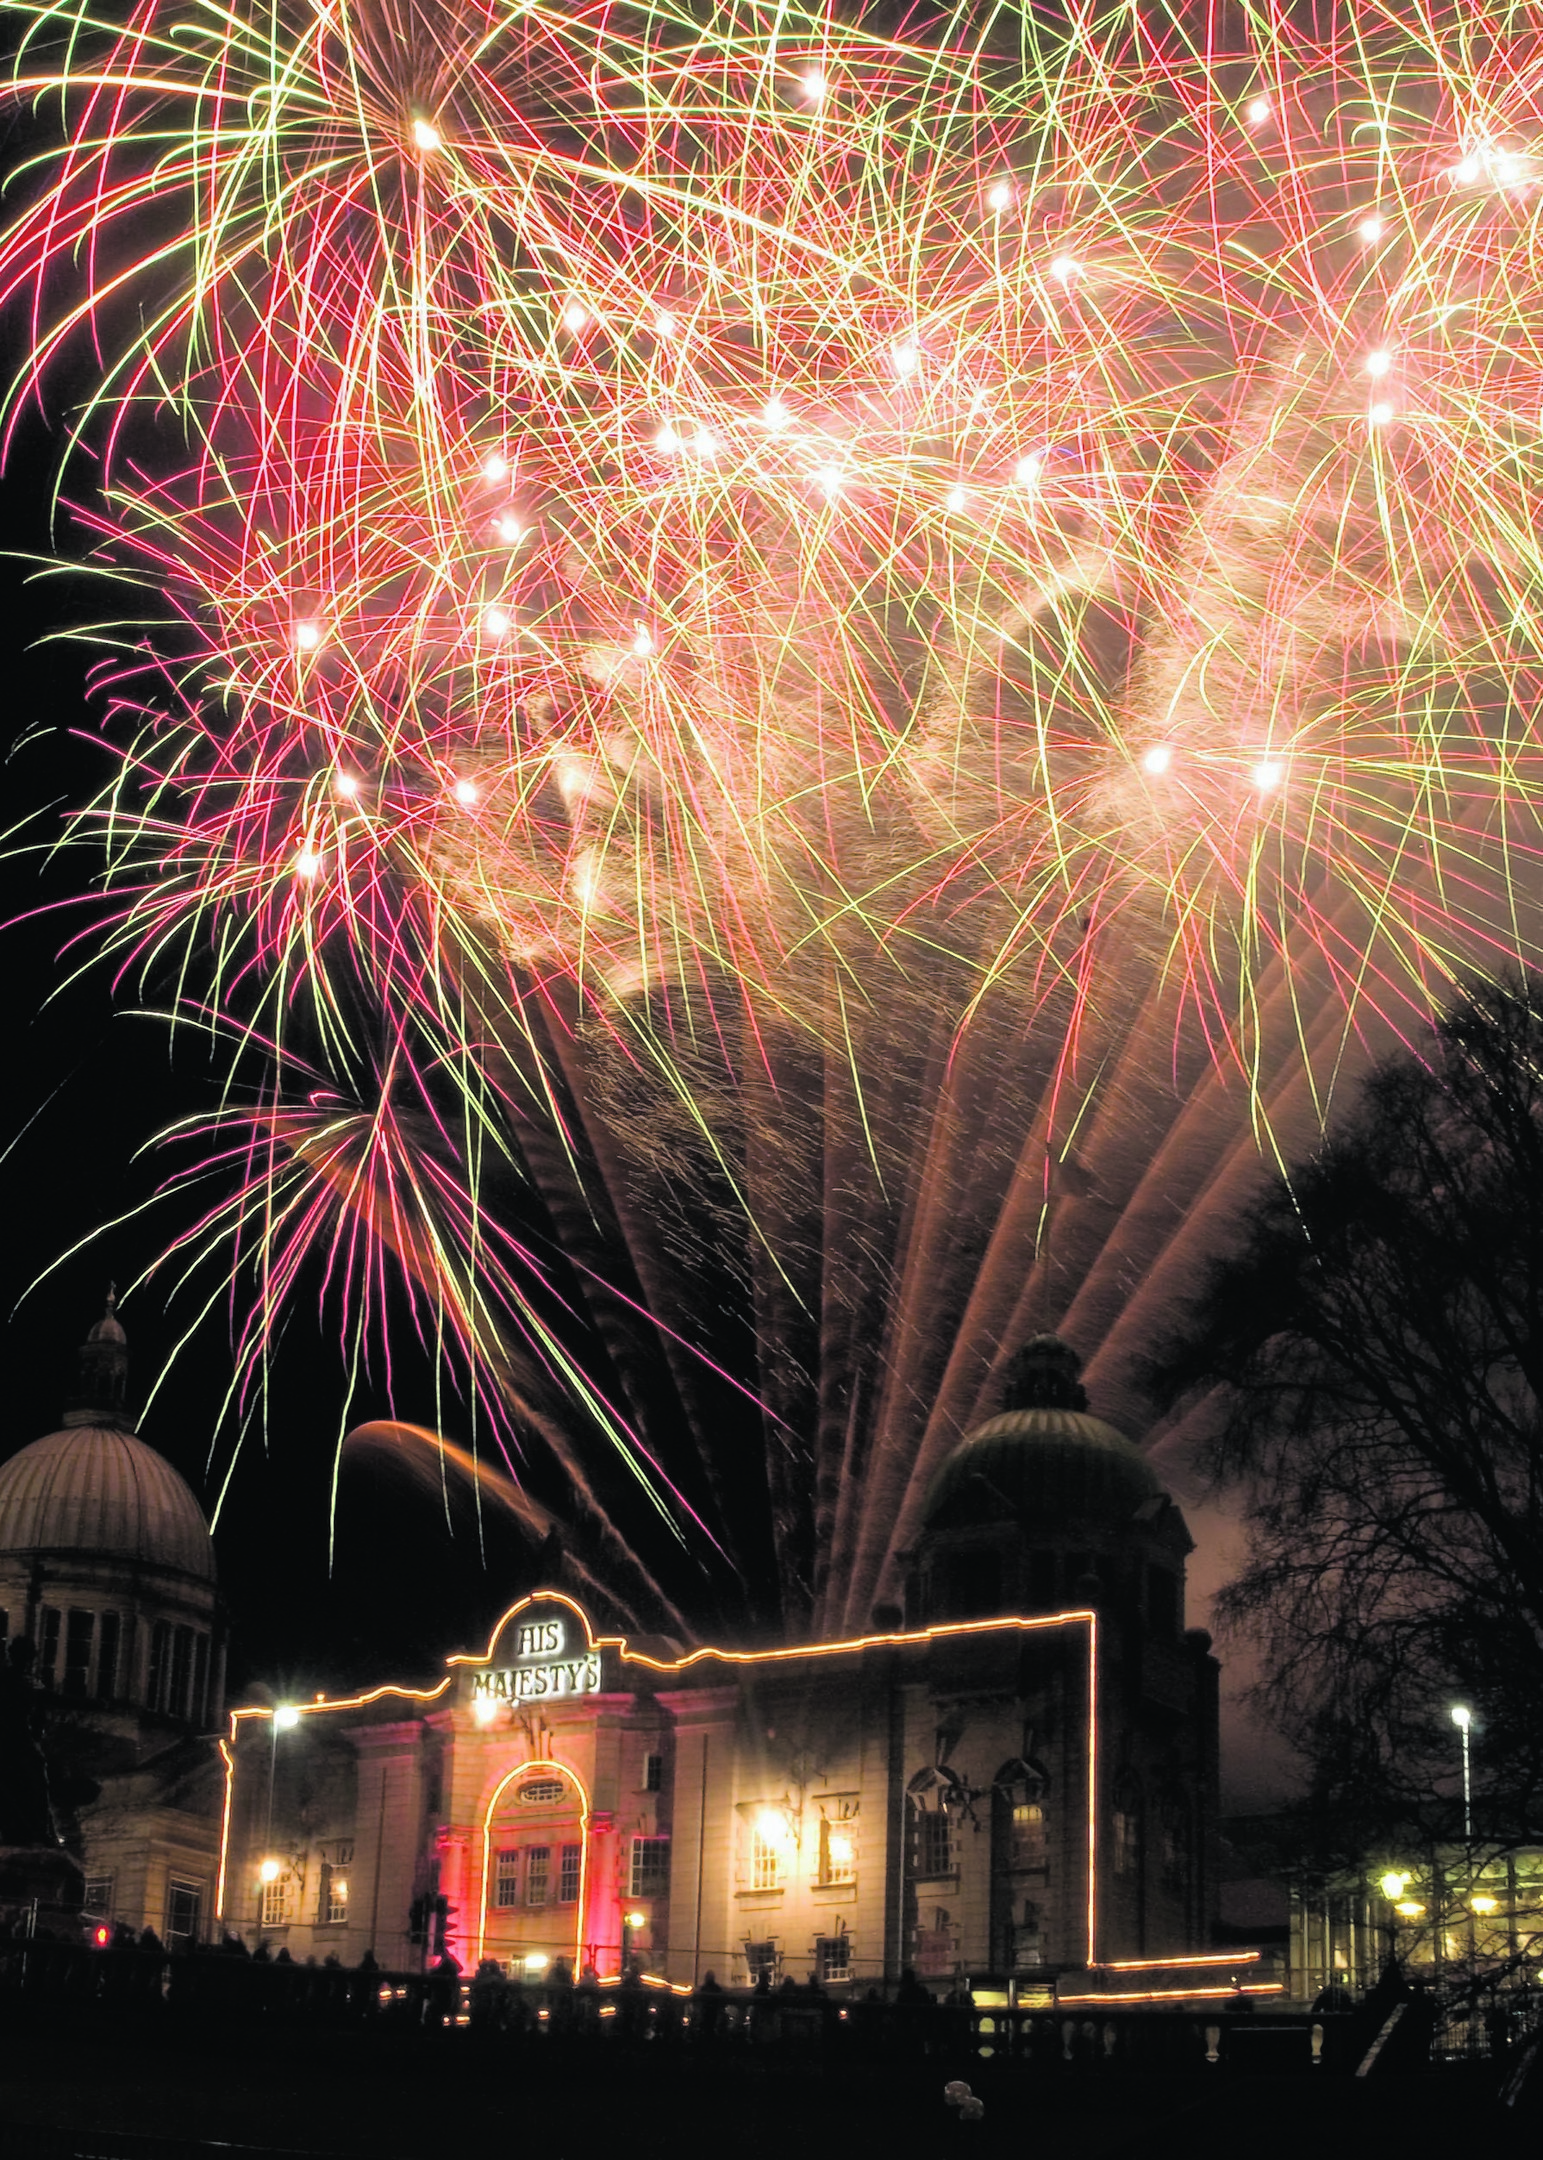 A fireworks display will light the sky over His Majesty’s Theatre in Aberdeen